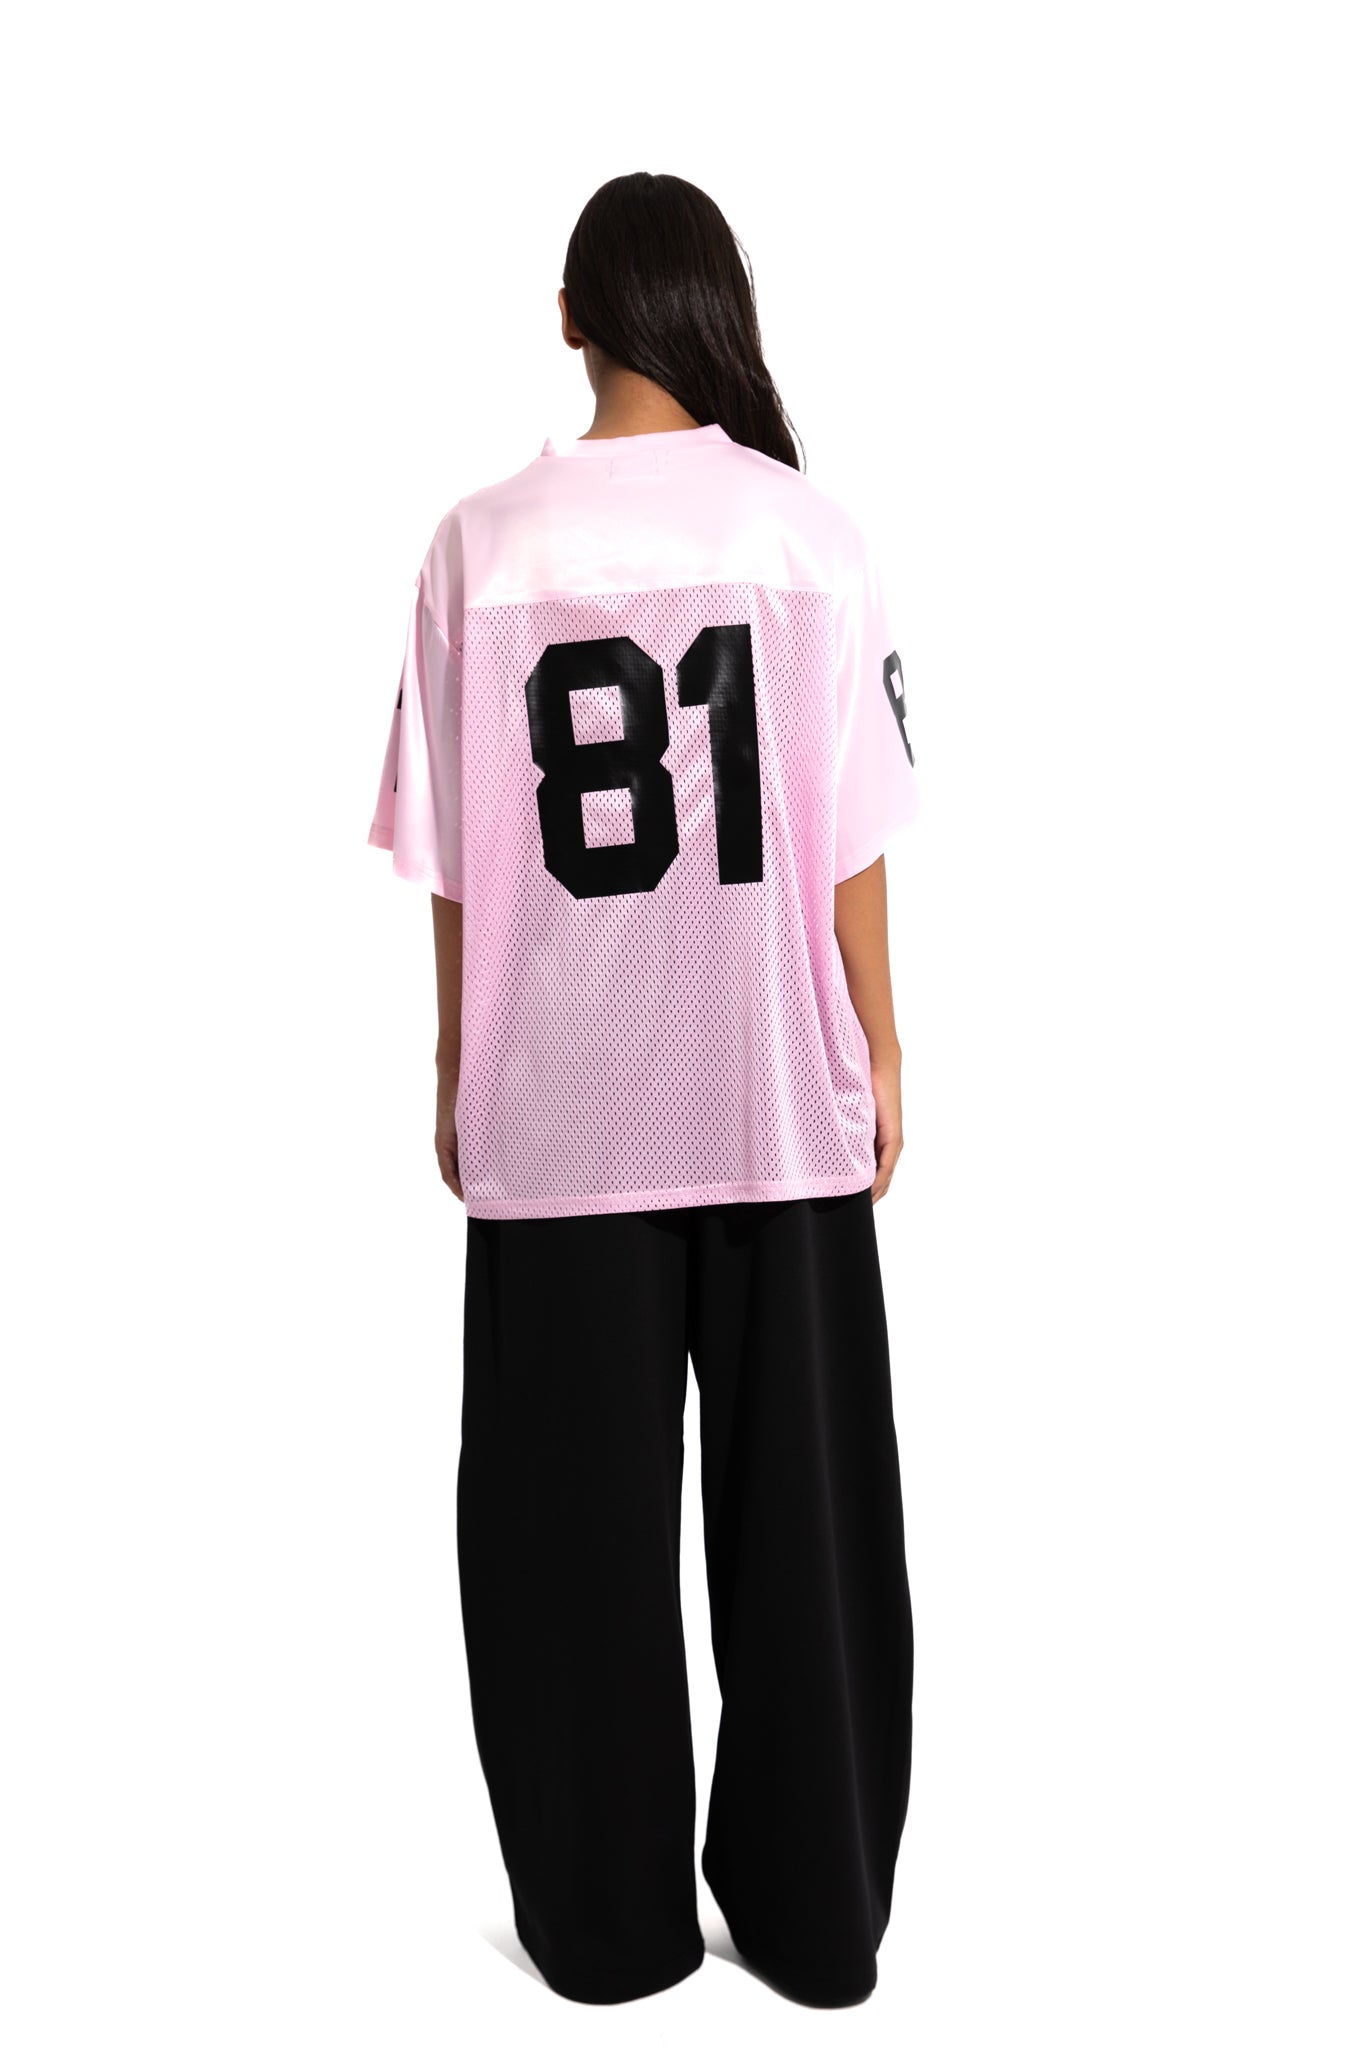 81 OVERSIZED T-SHIRT IN PINK